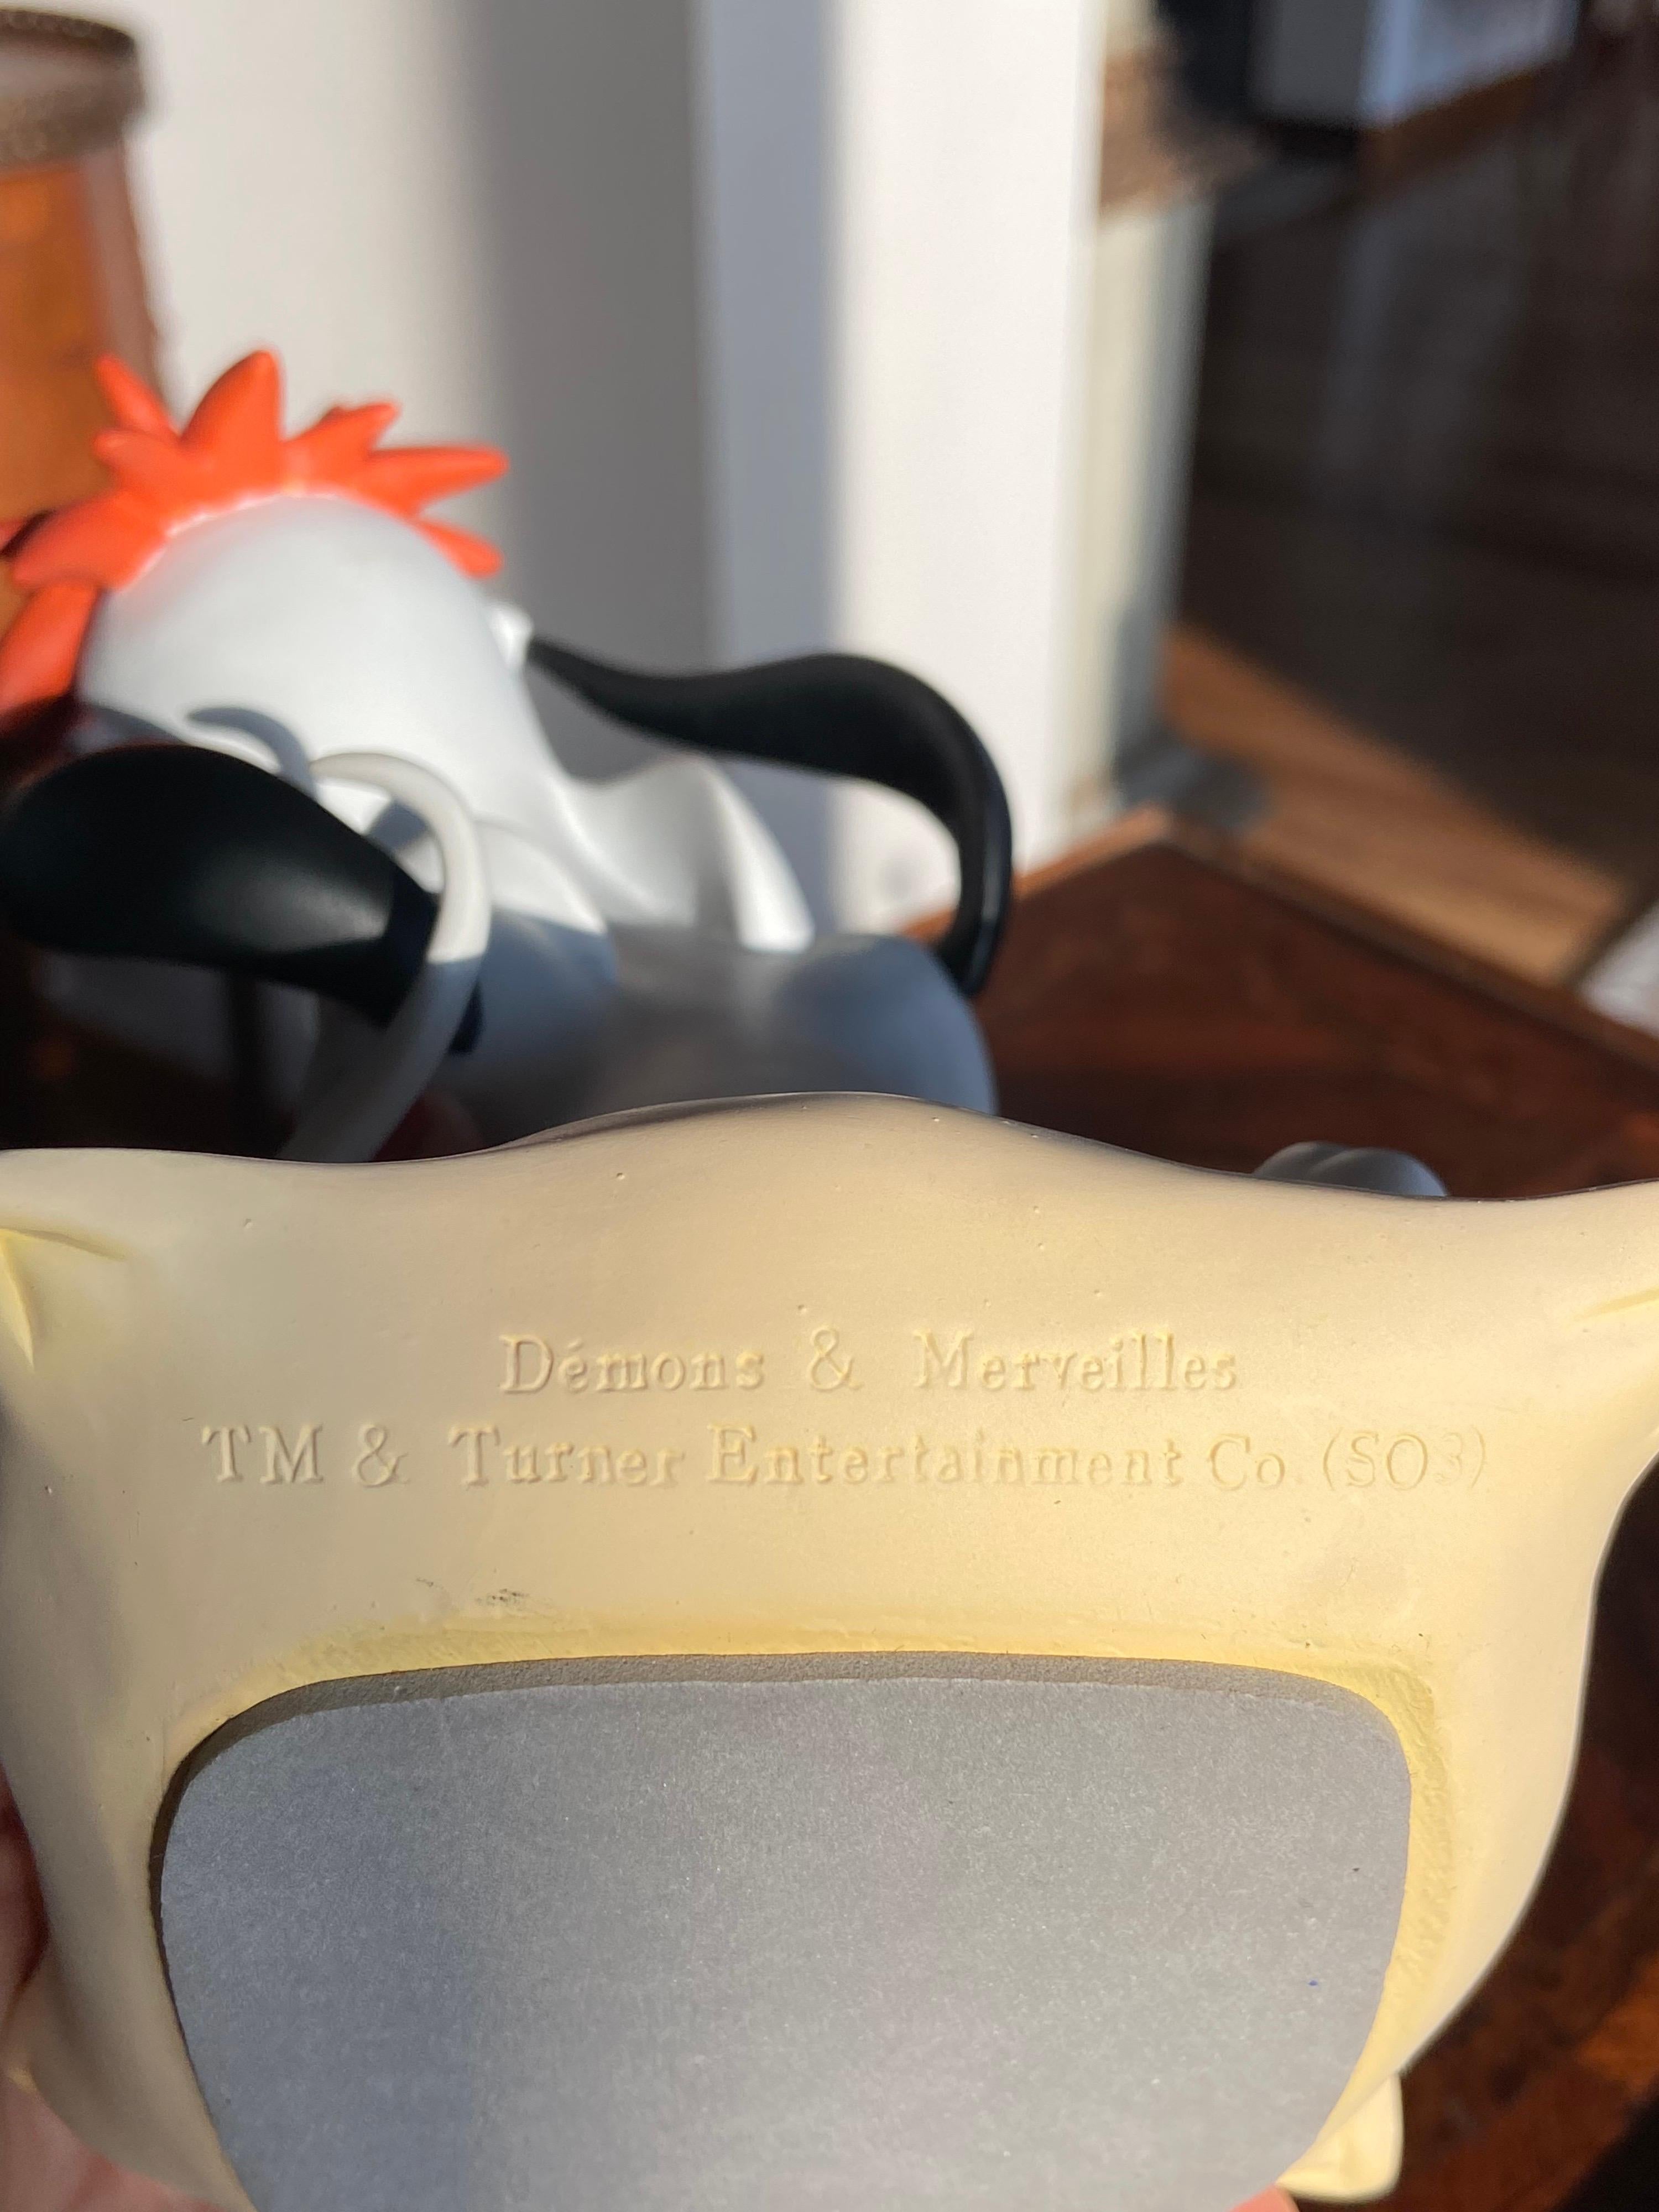 American Rare and Collectable Droopy on a Cushion by Demons & Merveilles Figurine Statue For Sale